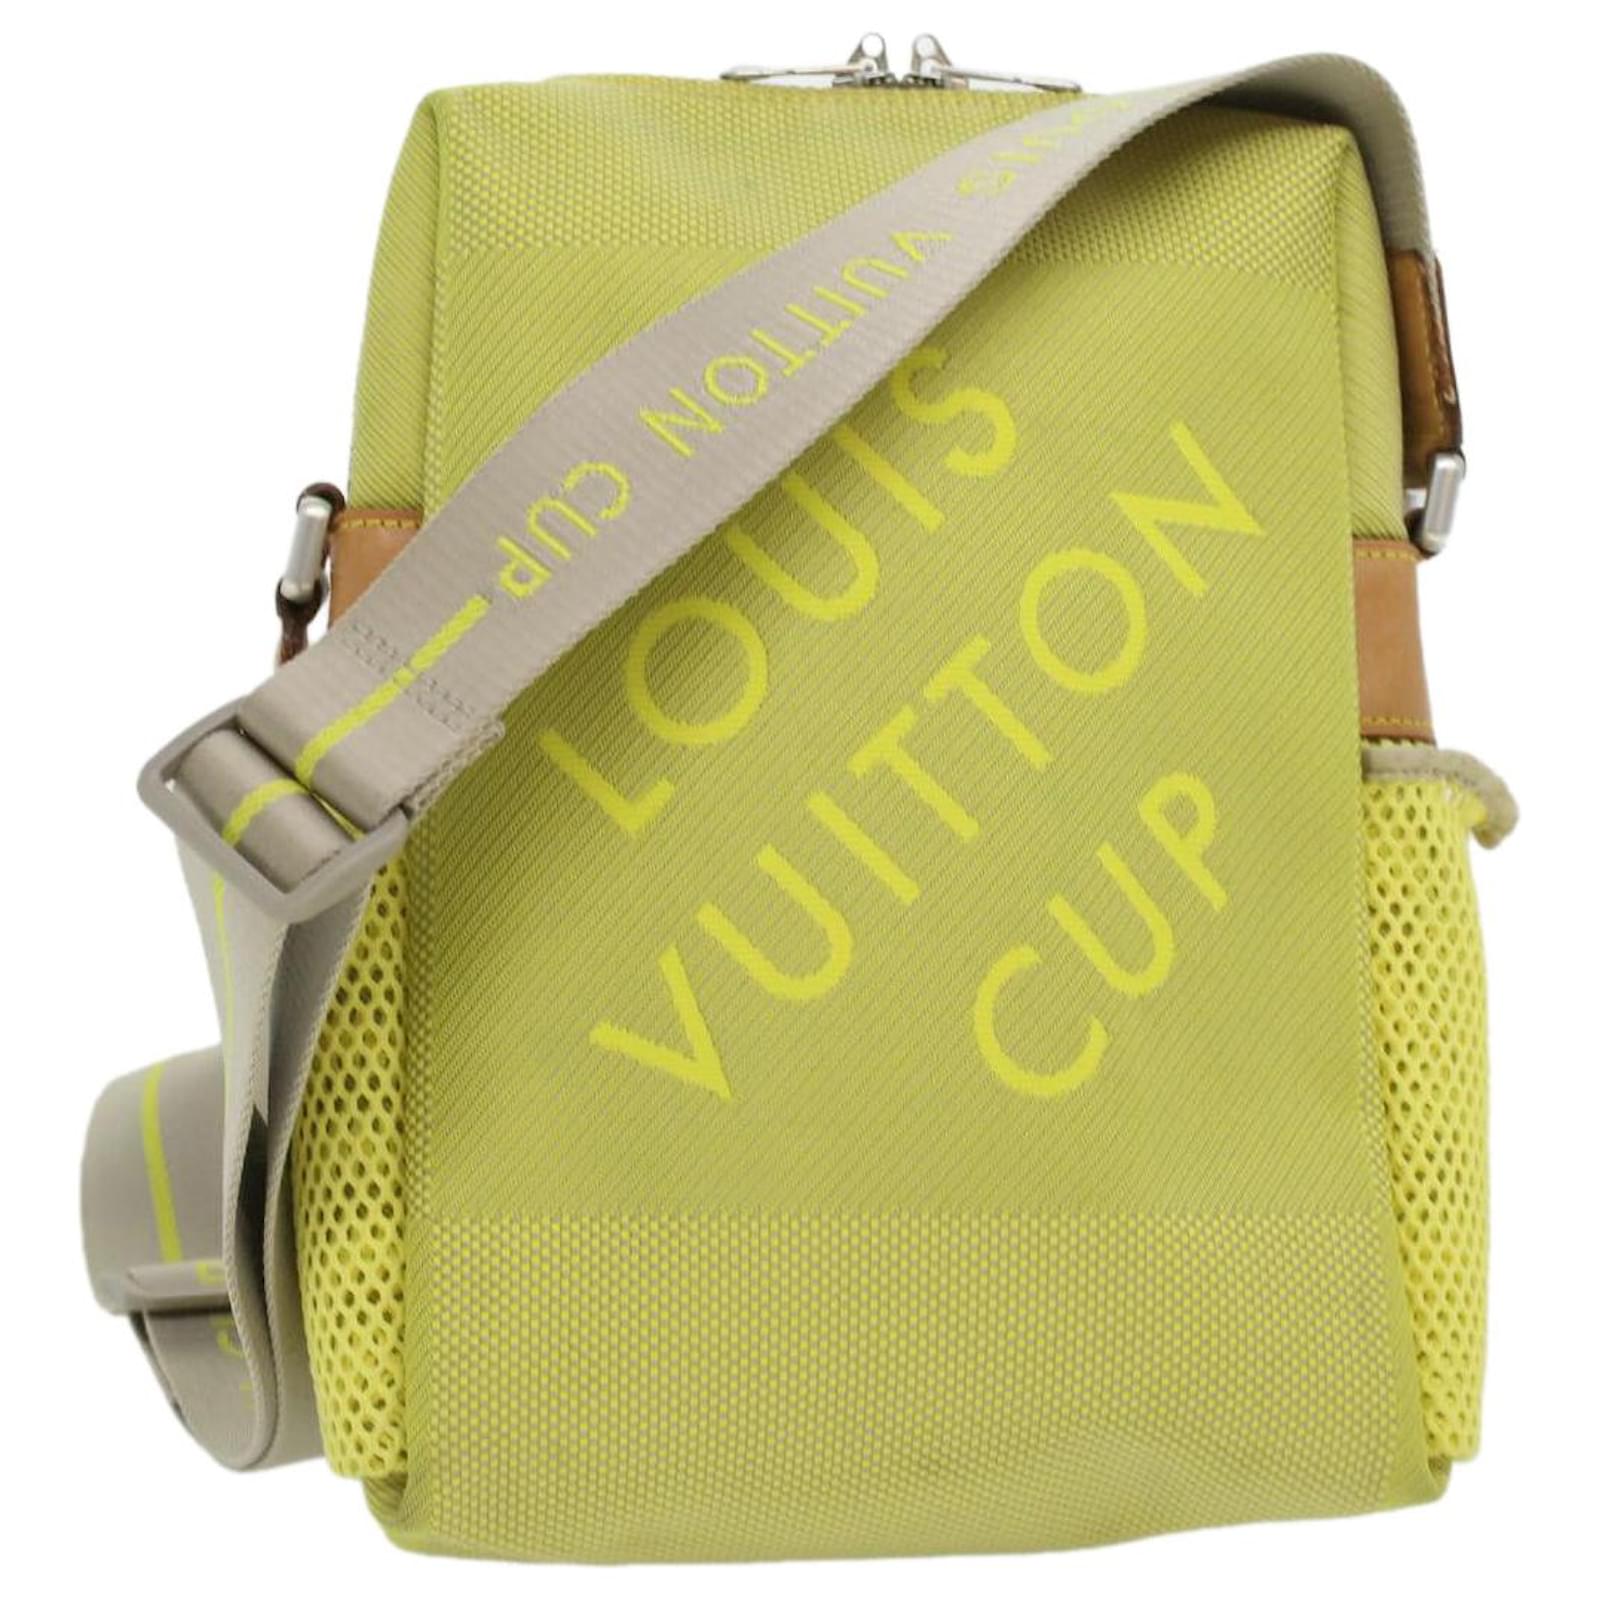 Auth Louis Vuitton Cup Damier Geant Weatherly Shoulder Bag Yellow